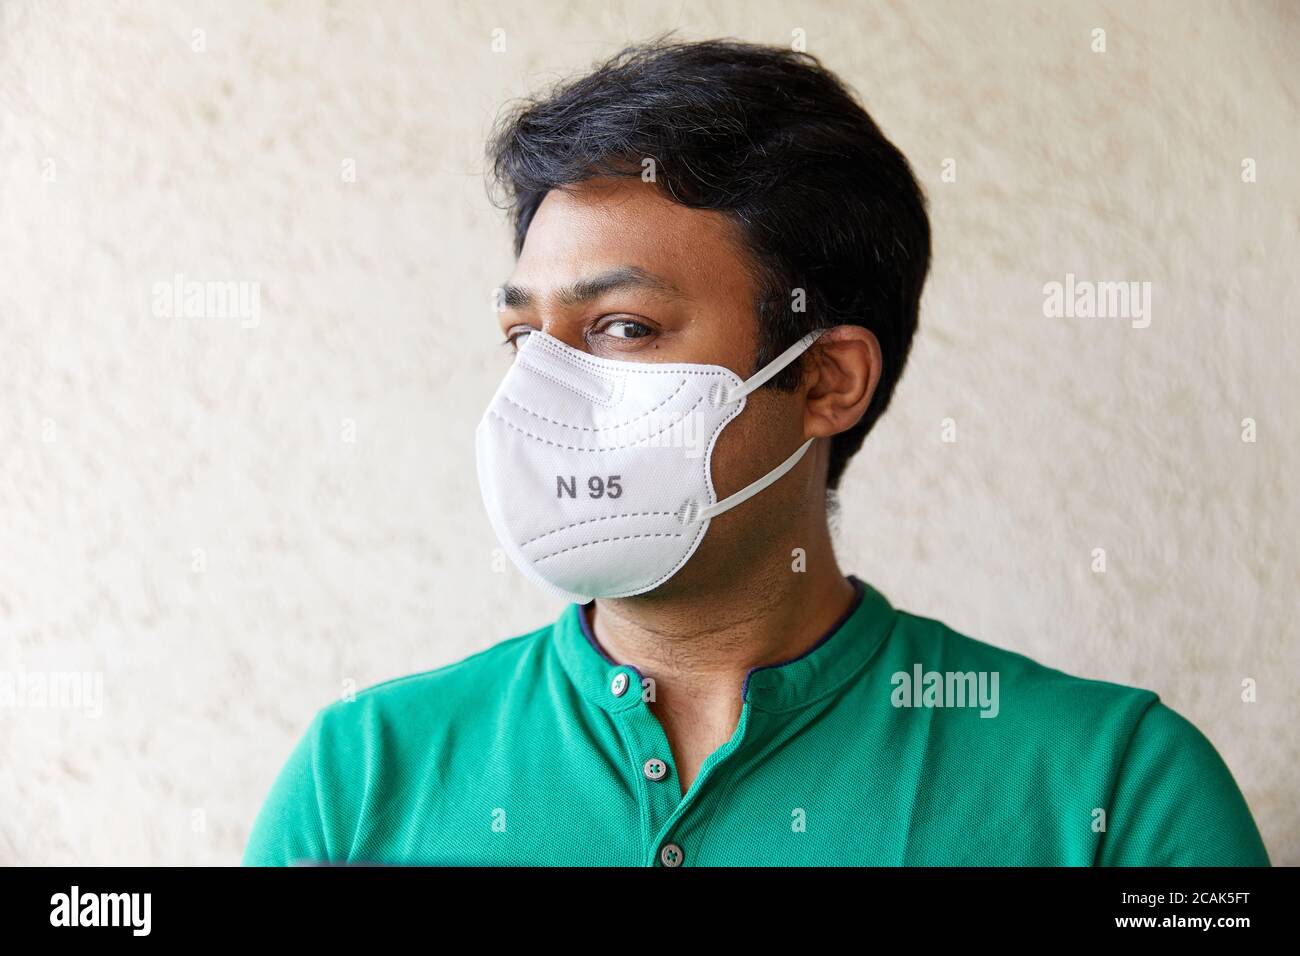 Adult Indian Male wearing a White N95 Respirator in Green T-Shirt looking into the camera with head faced 45 degrees with textured background Stock Photo